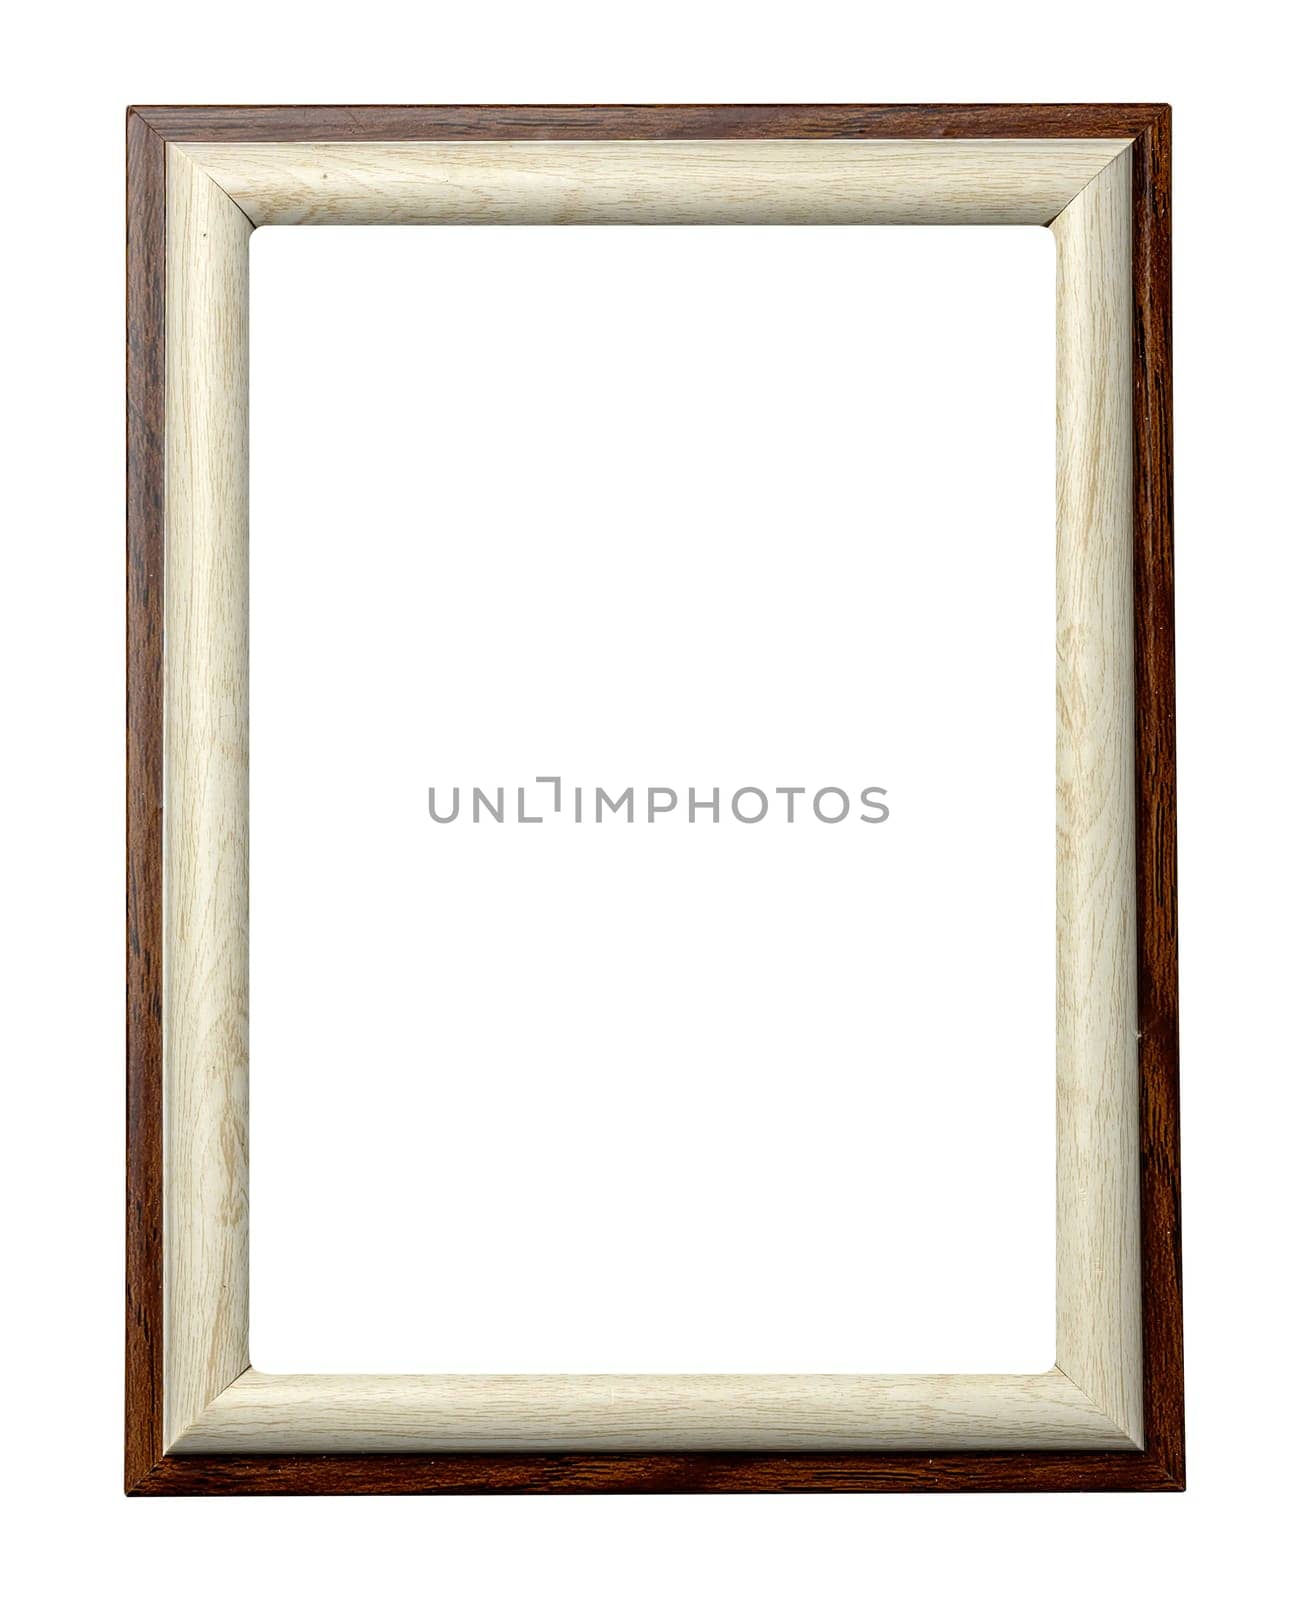 Brown wooden frame for paintings and photos by ndanko